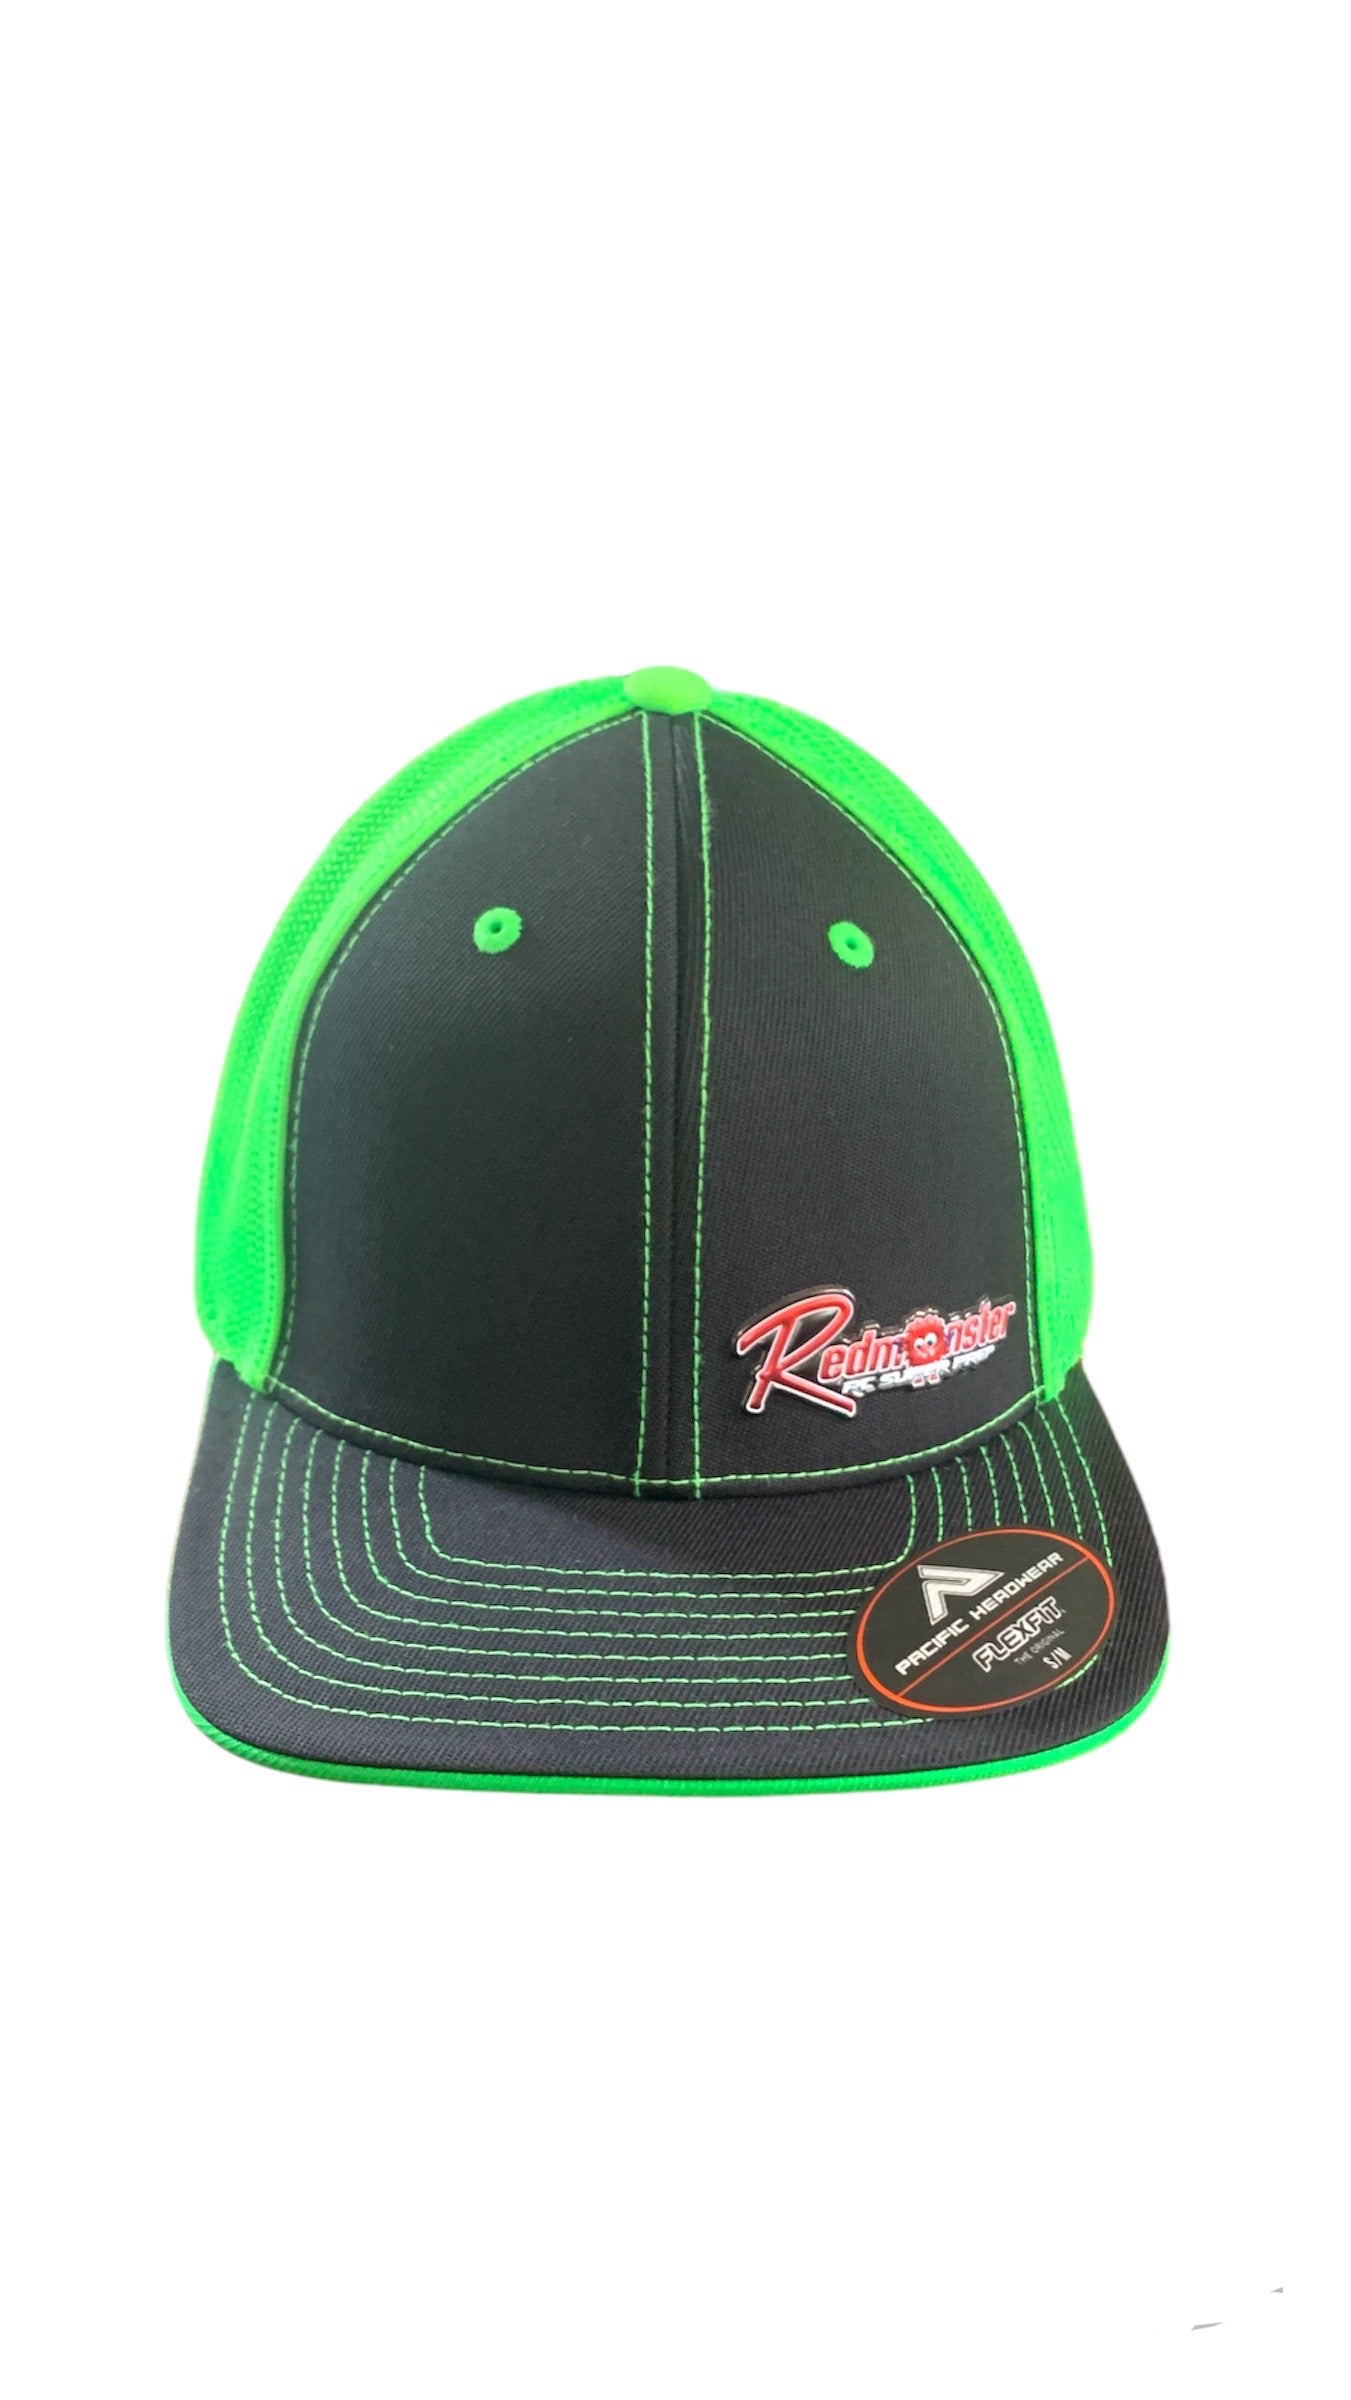 RED MONSTER-FITTED HAT-SM/MD-NEON GREEN(RM2060)